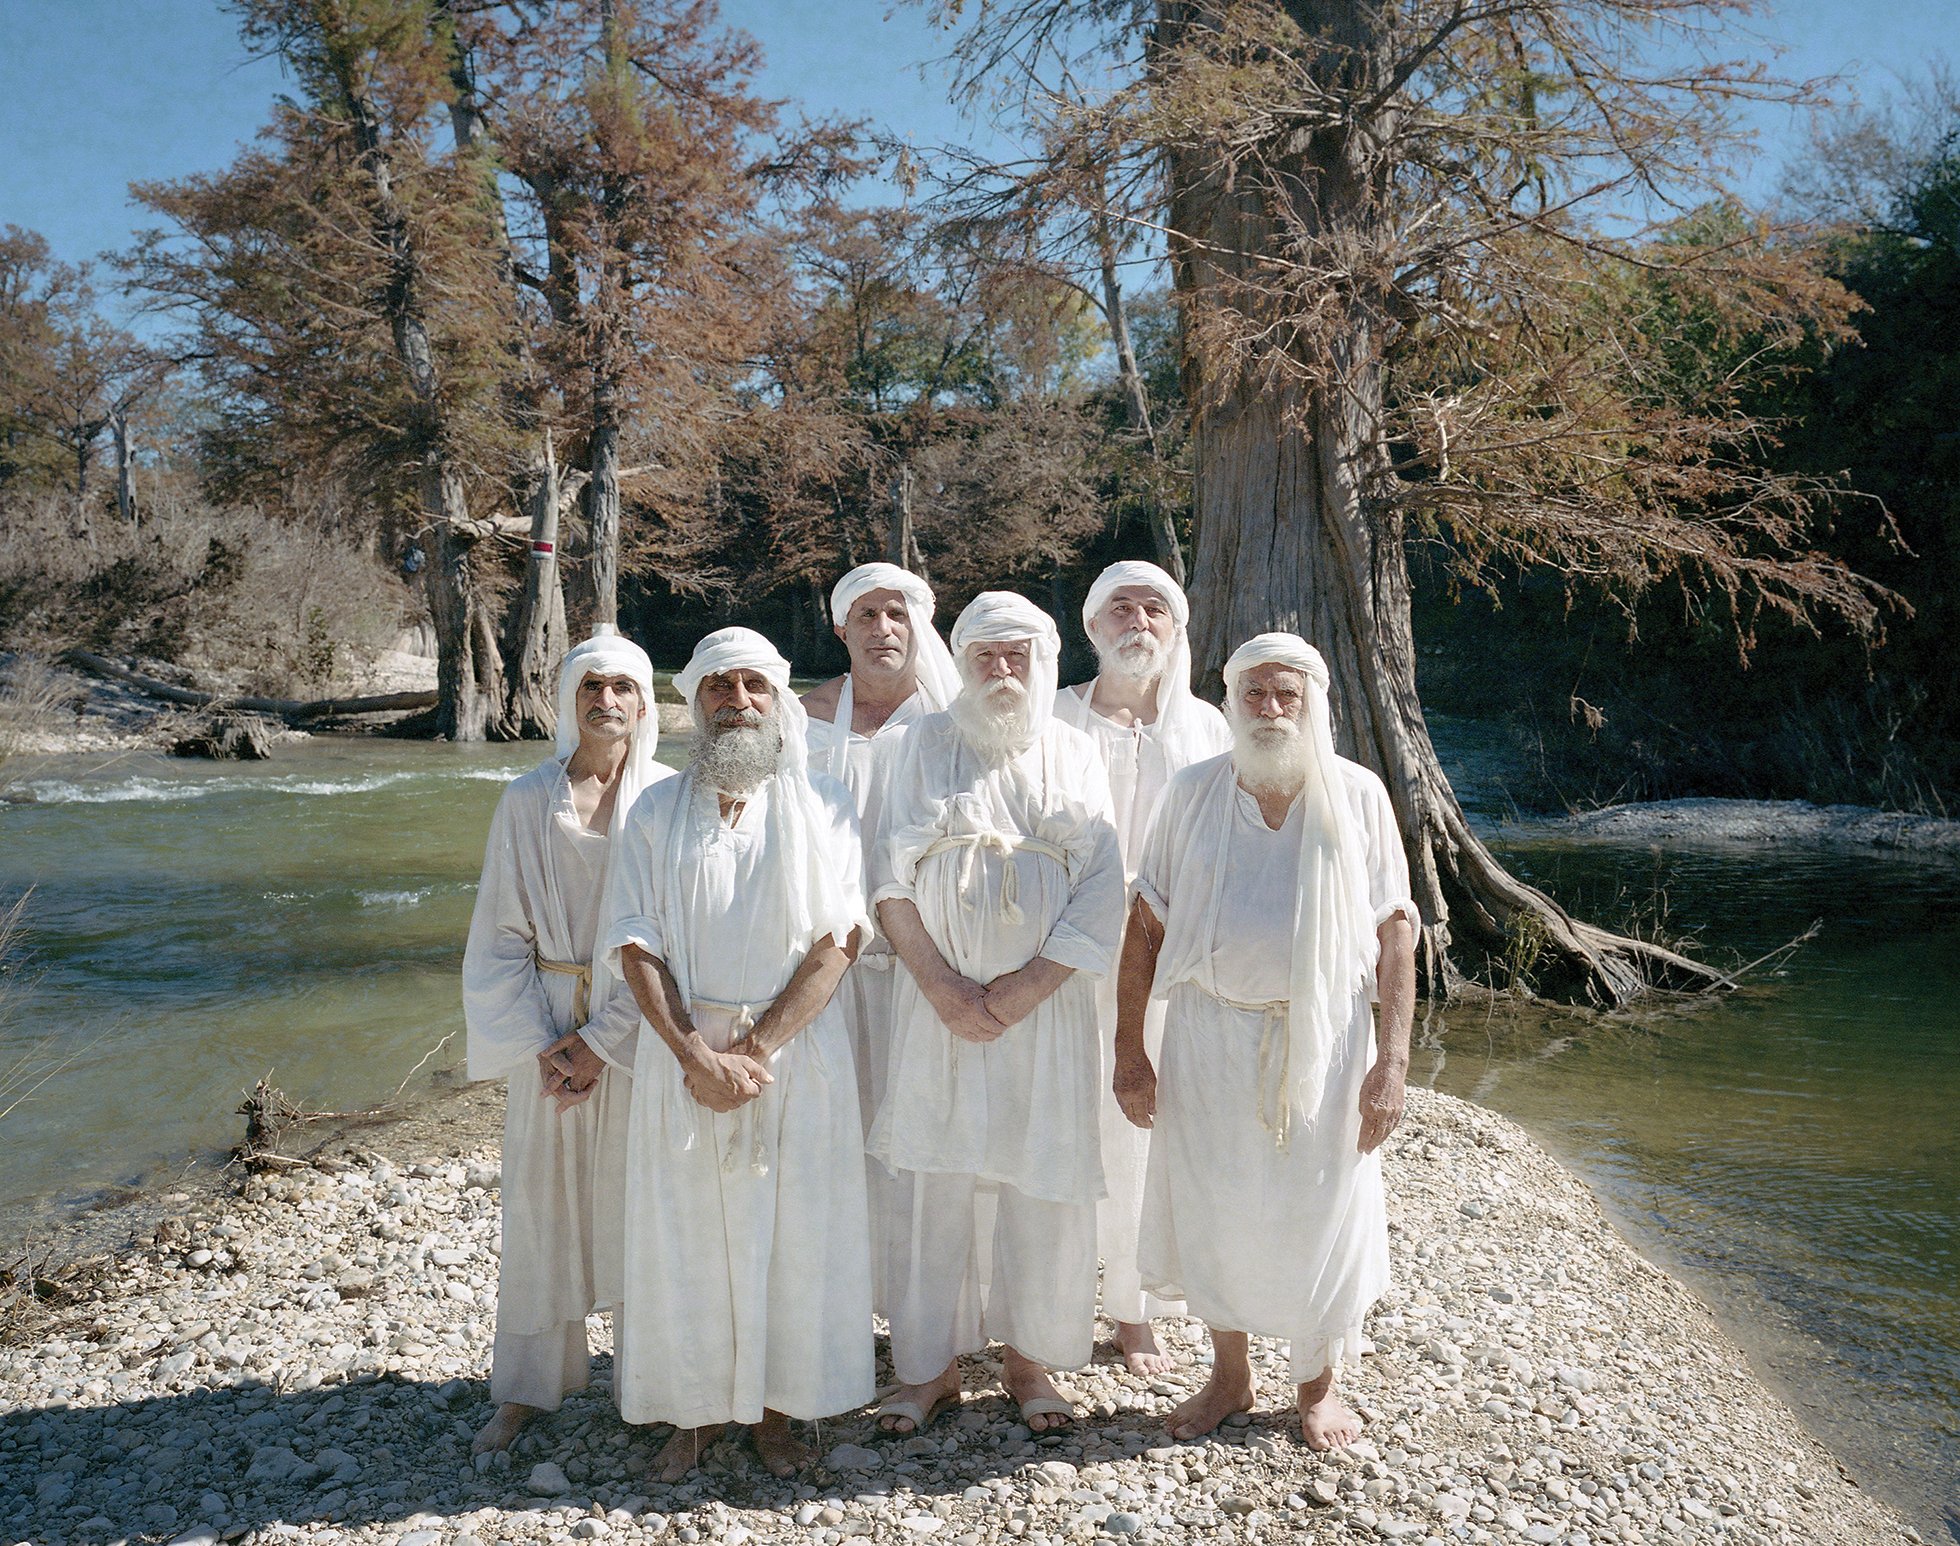 Mandaeans at the Guadalupe River after their baptism. From left: Bahman Ebadeh Ahvazi, Shahram Ebadfardzadeh, Sobhan Zahrooni, his father Hanoon Zahrooni, Sabah Al Dehaisy, and Hormoz Ebadeh Ahvazi.